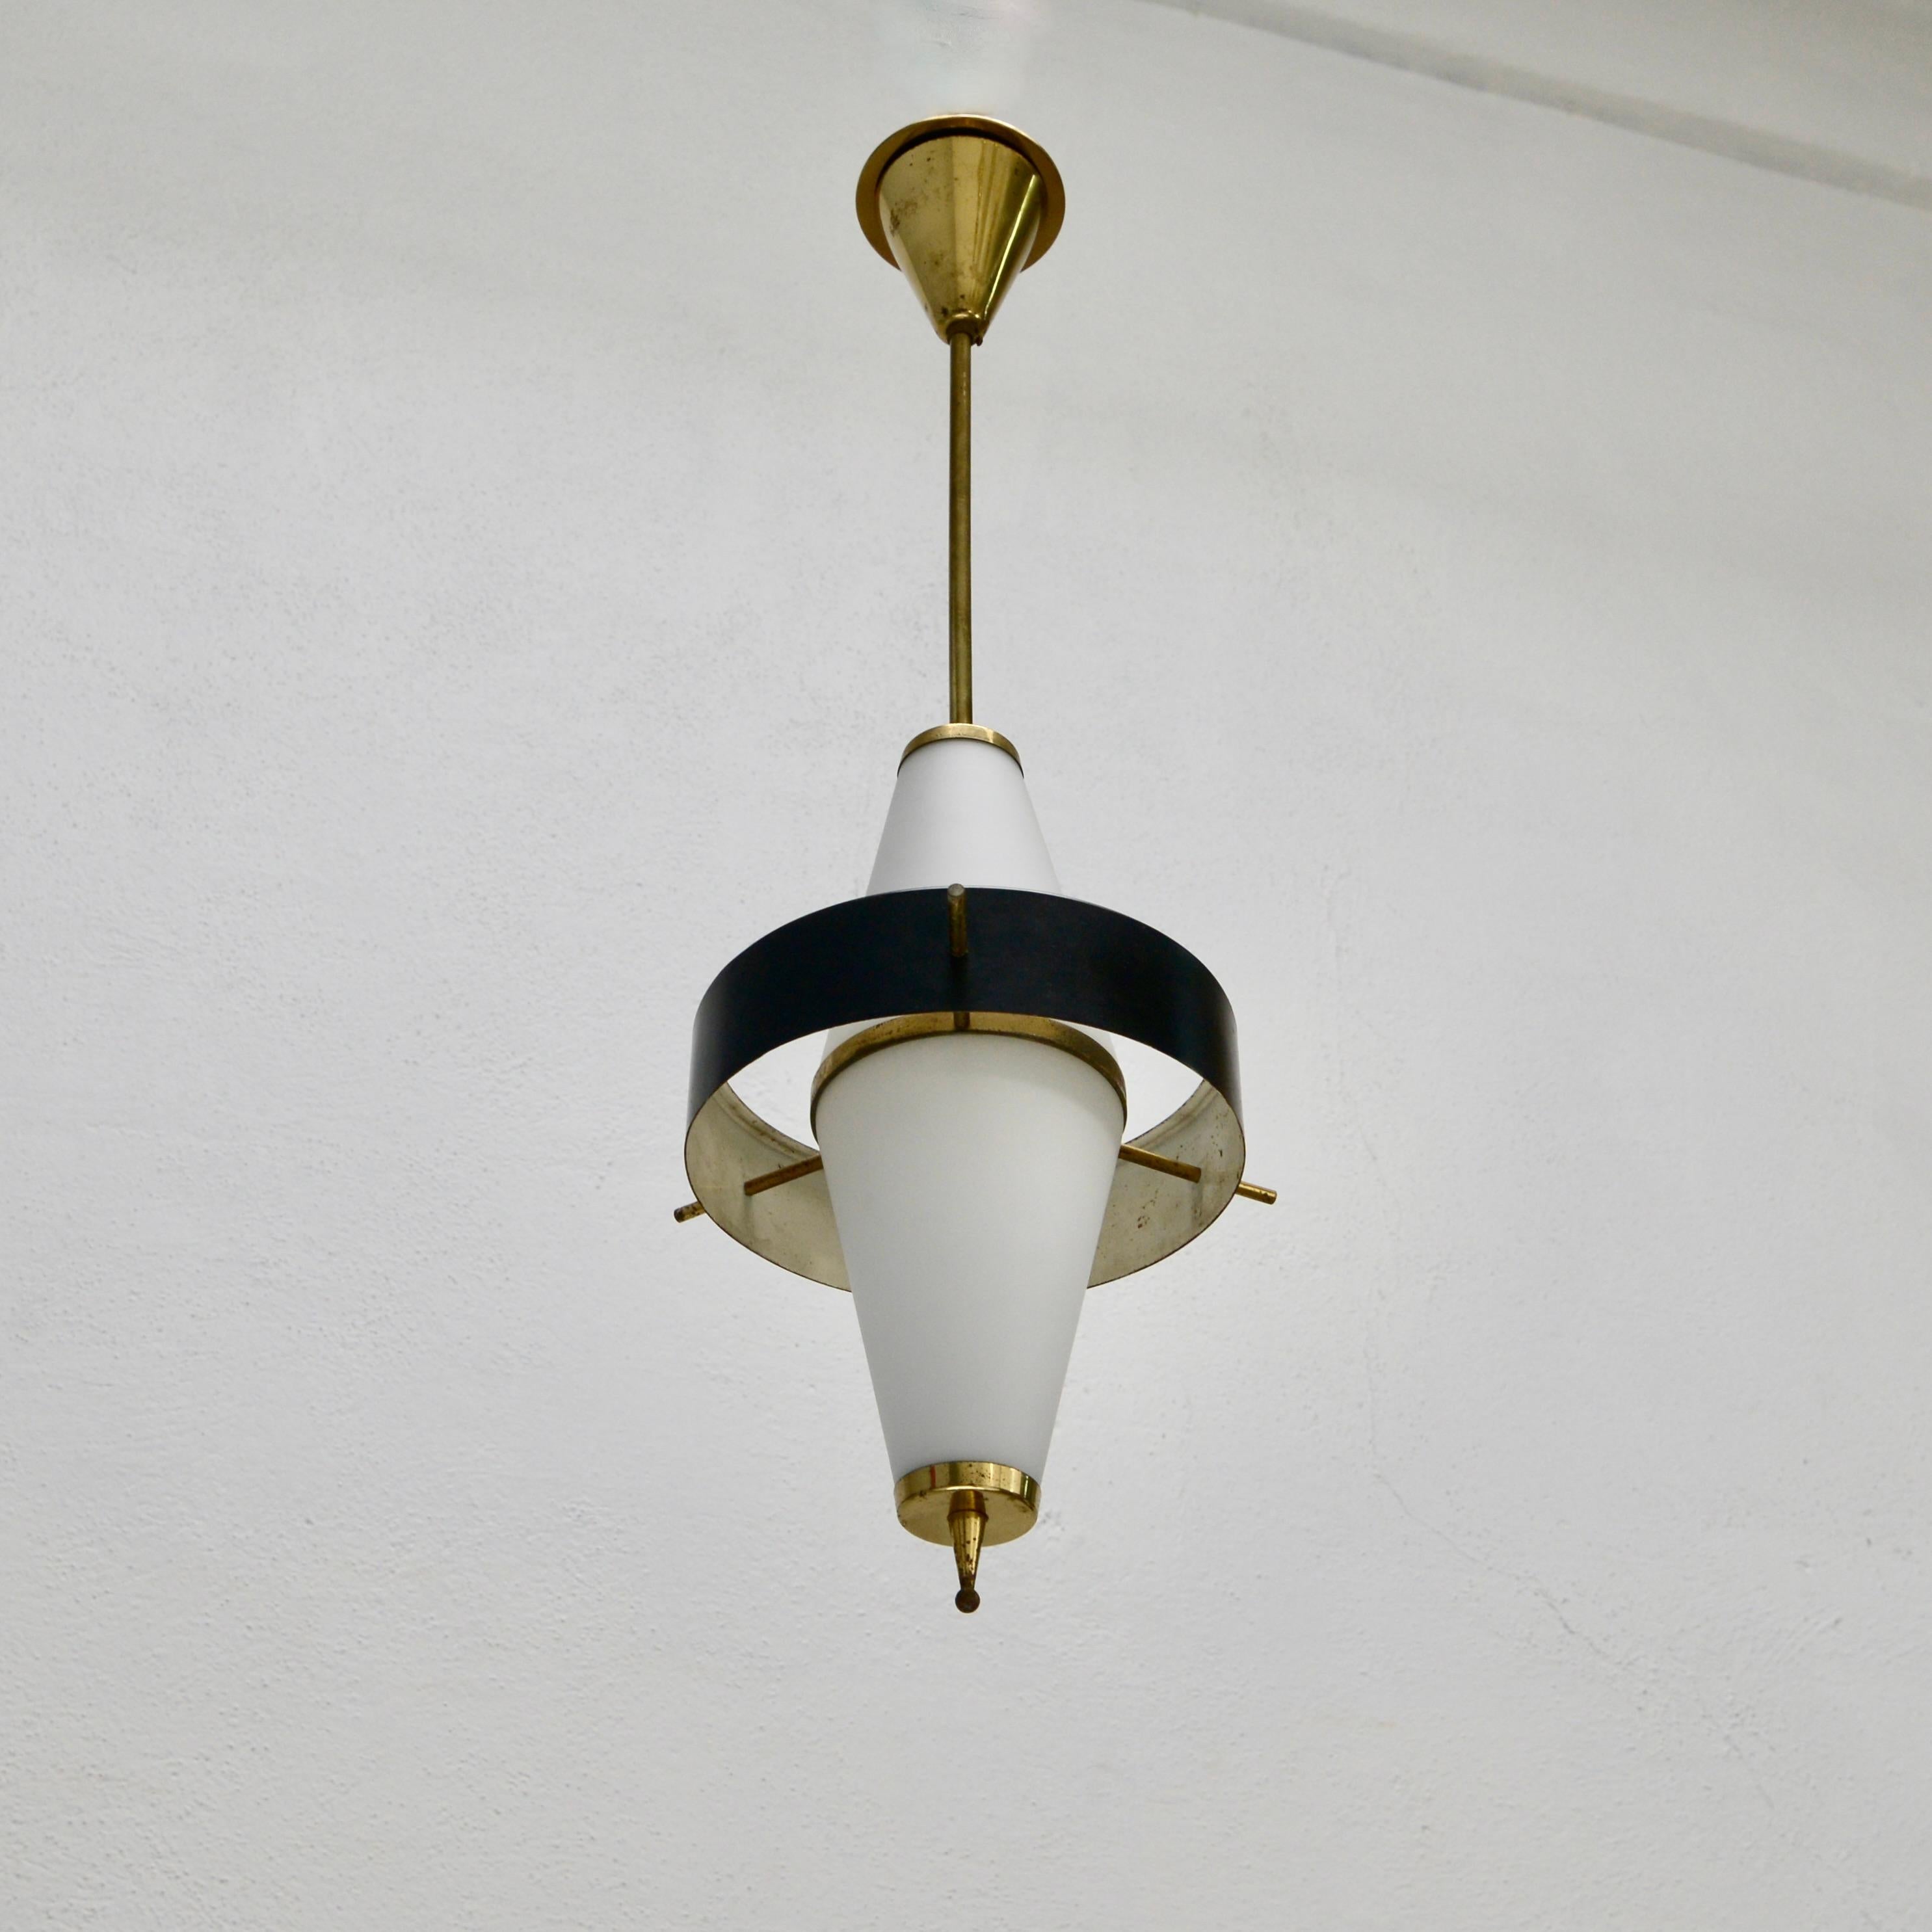 A stunning 1950s glass and brass Stilnovo pendant from Italy, Partially restored. Lightly patinated brass finish, painted steel and blown glass, wired with 1-E26 medium based socket for use in the US. Light bulb included with order.